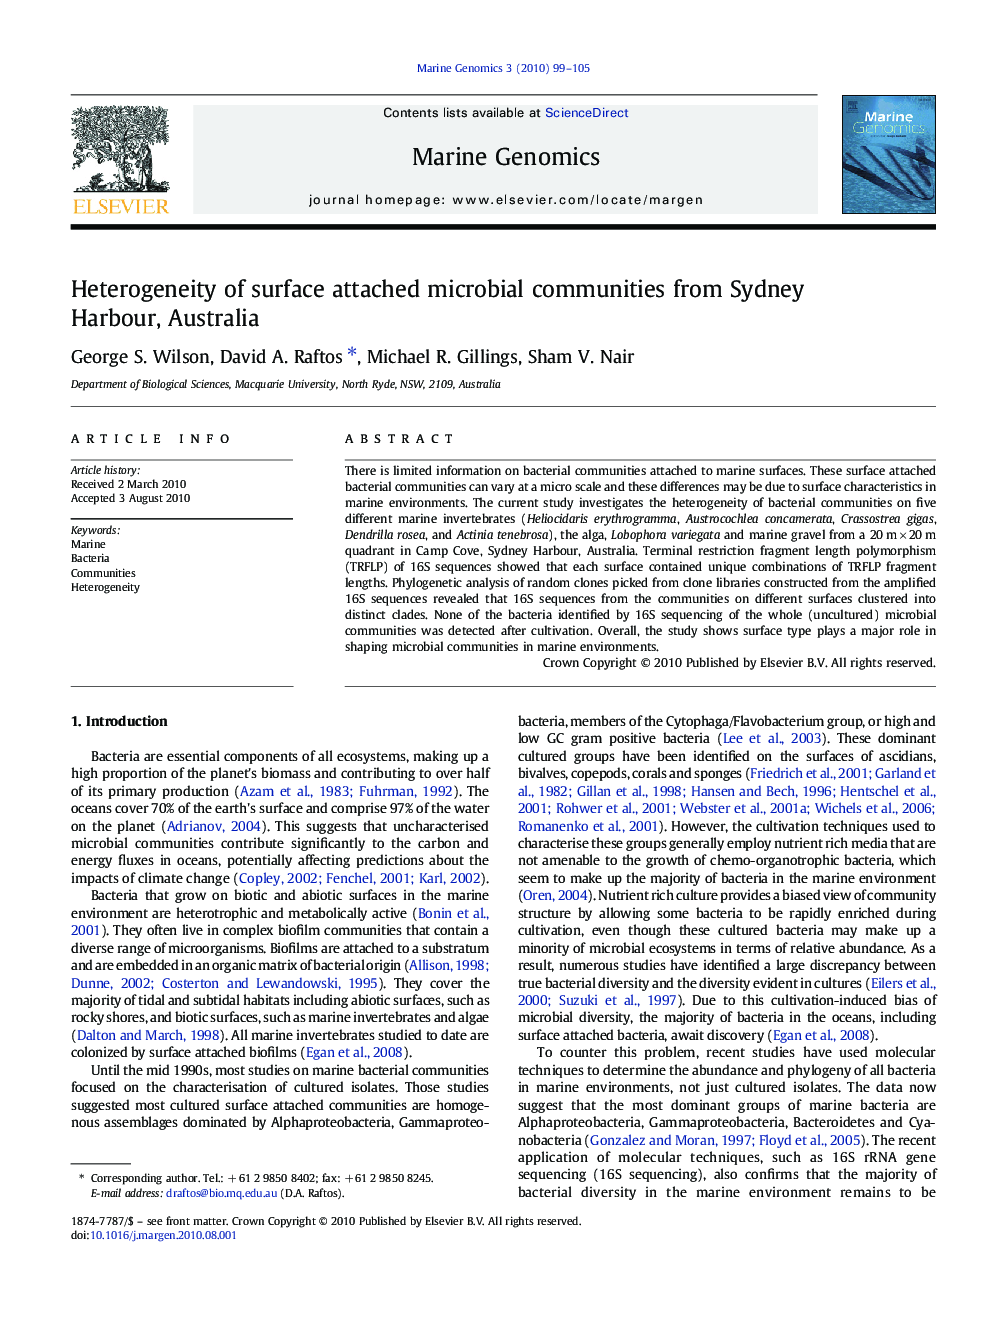 Heterogeneity of surface attached microbial communities from Sydney Harbour, Australia